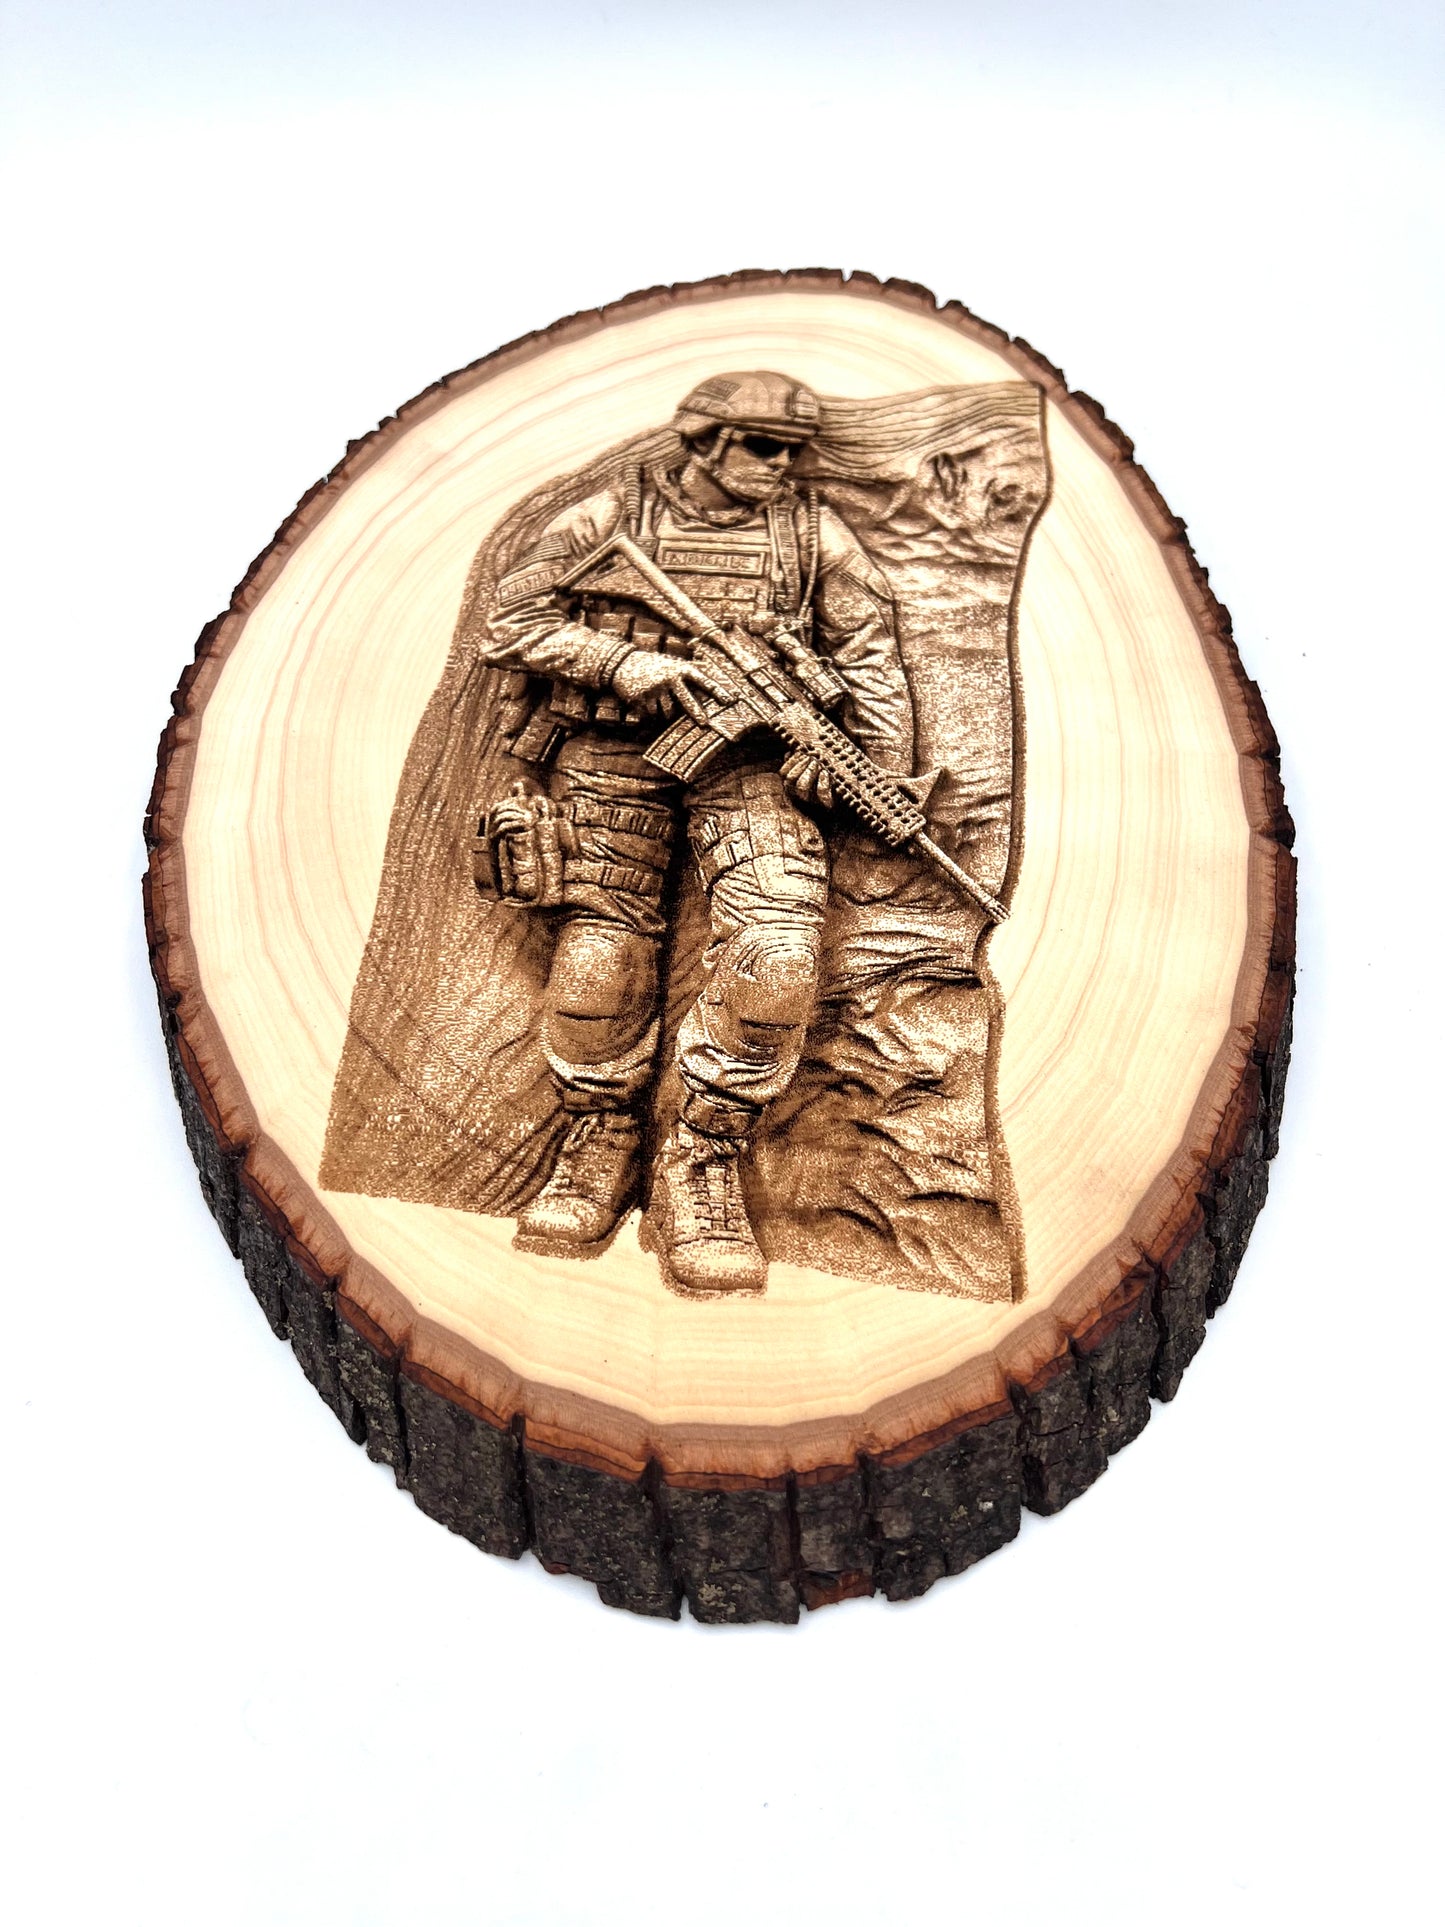 Soldier Engraved on Round Wood with Bark Edges